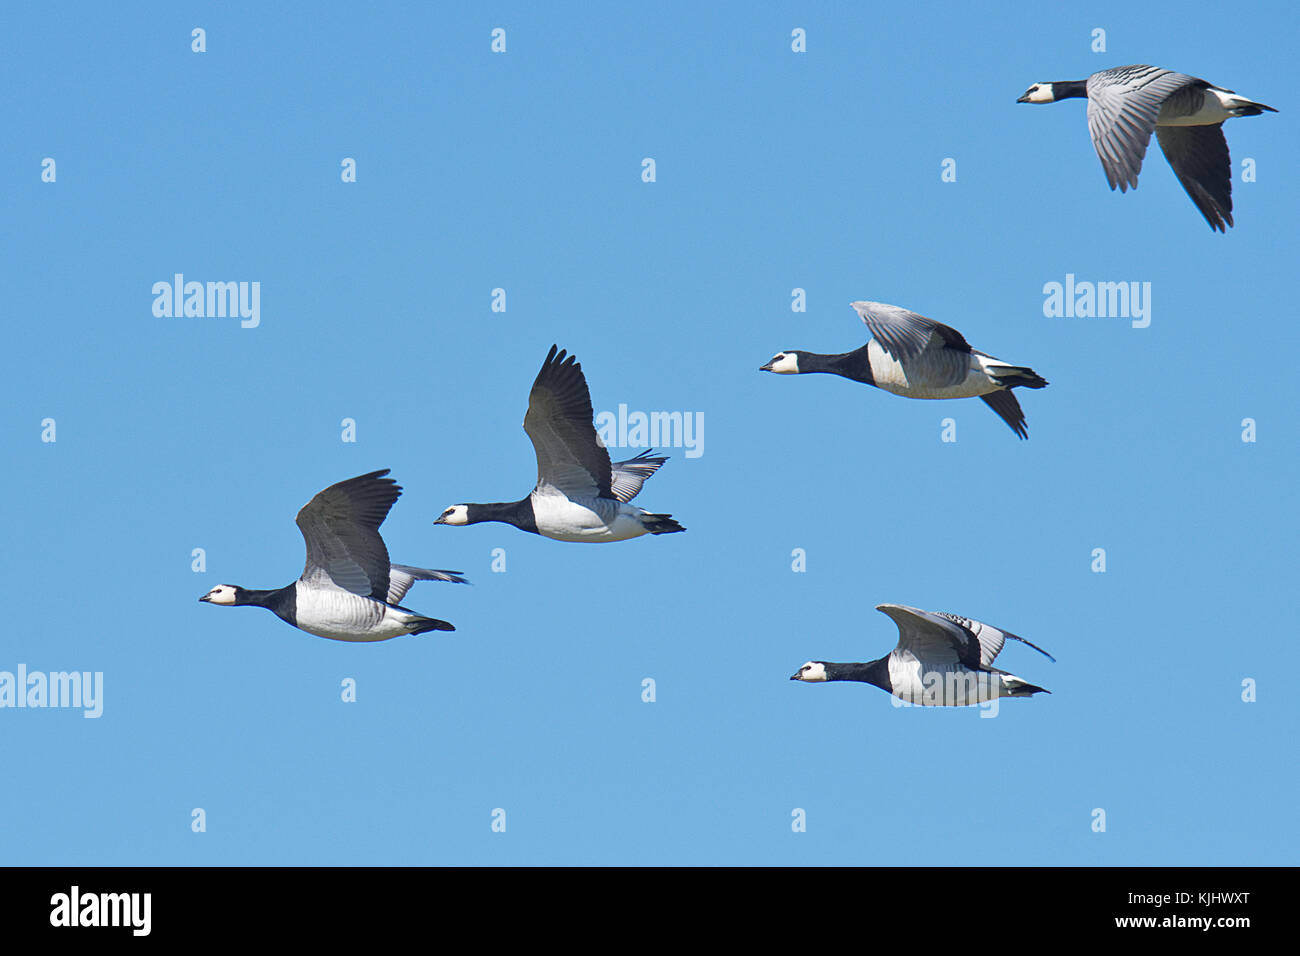 Five barnacle geese flying in sky, East Frisia, Lower Saxony, Germany Stock Photo